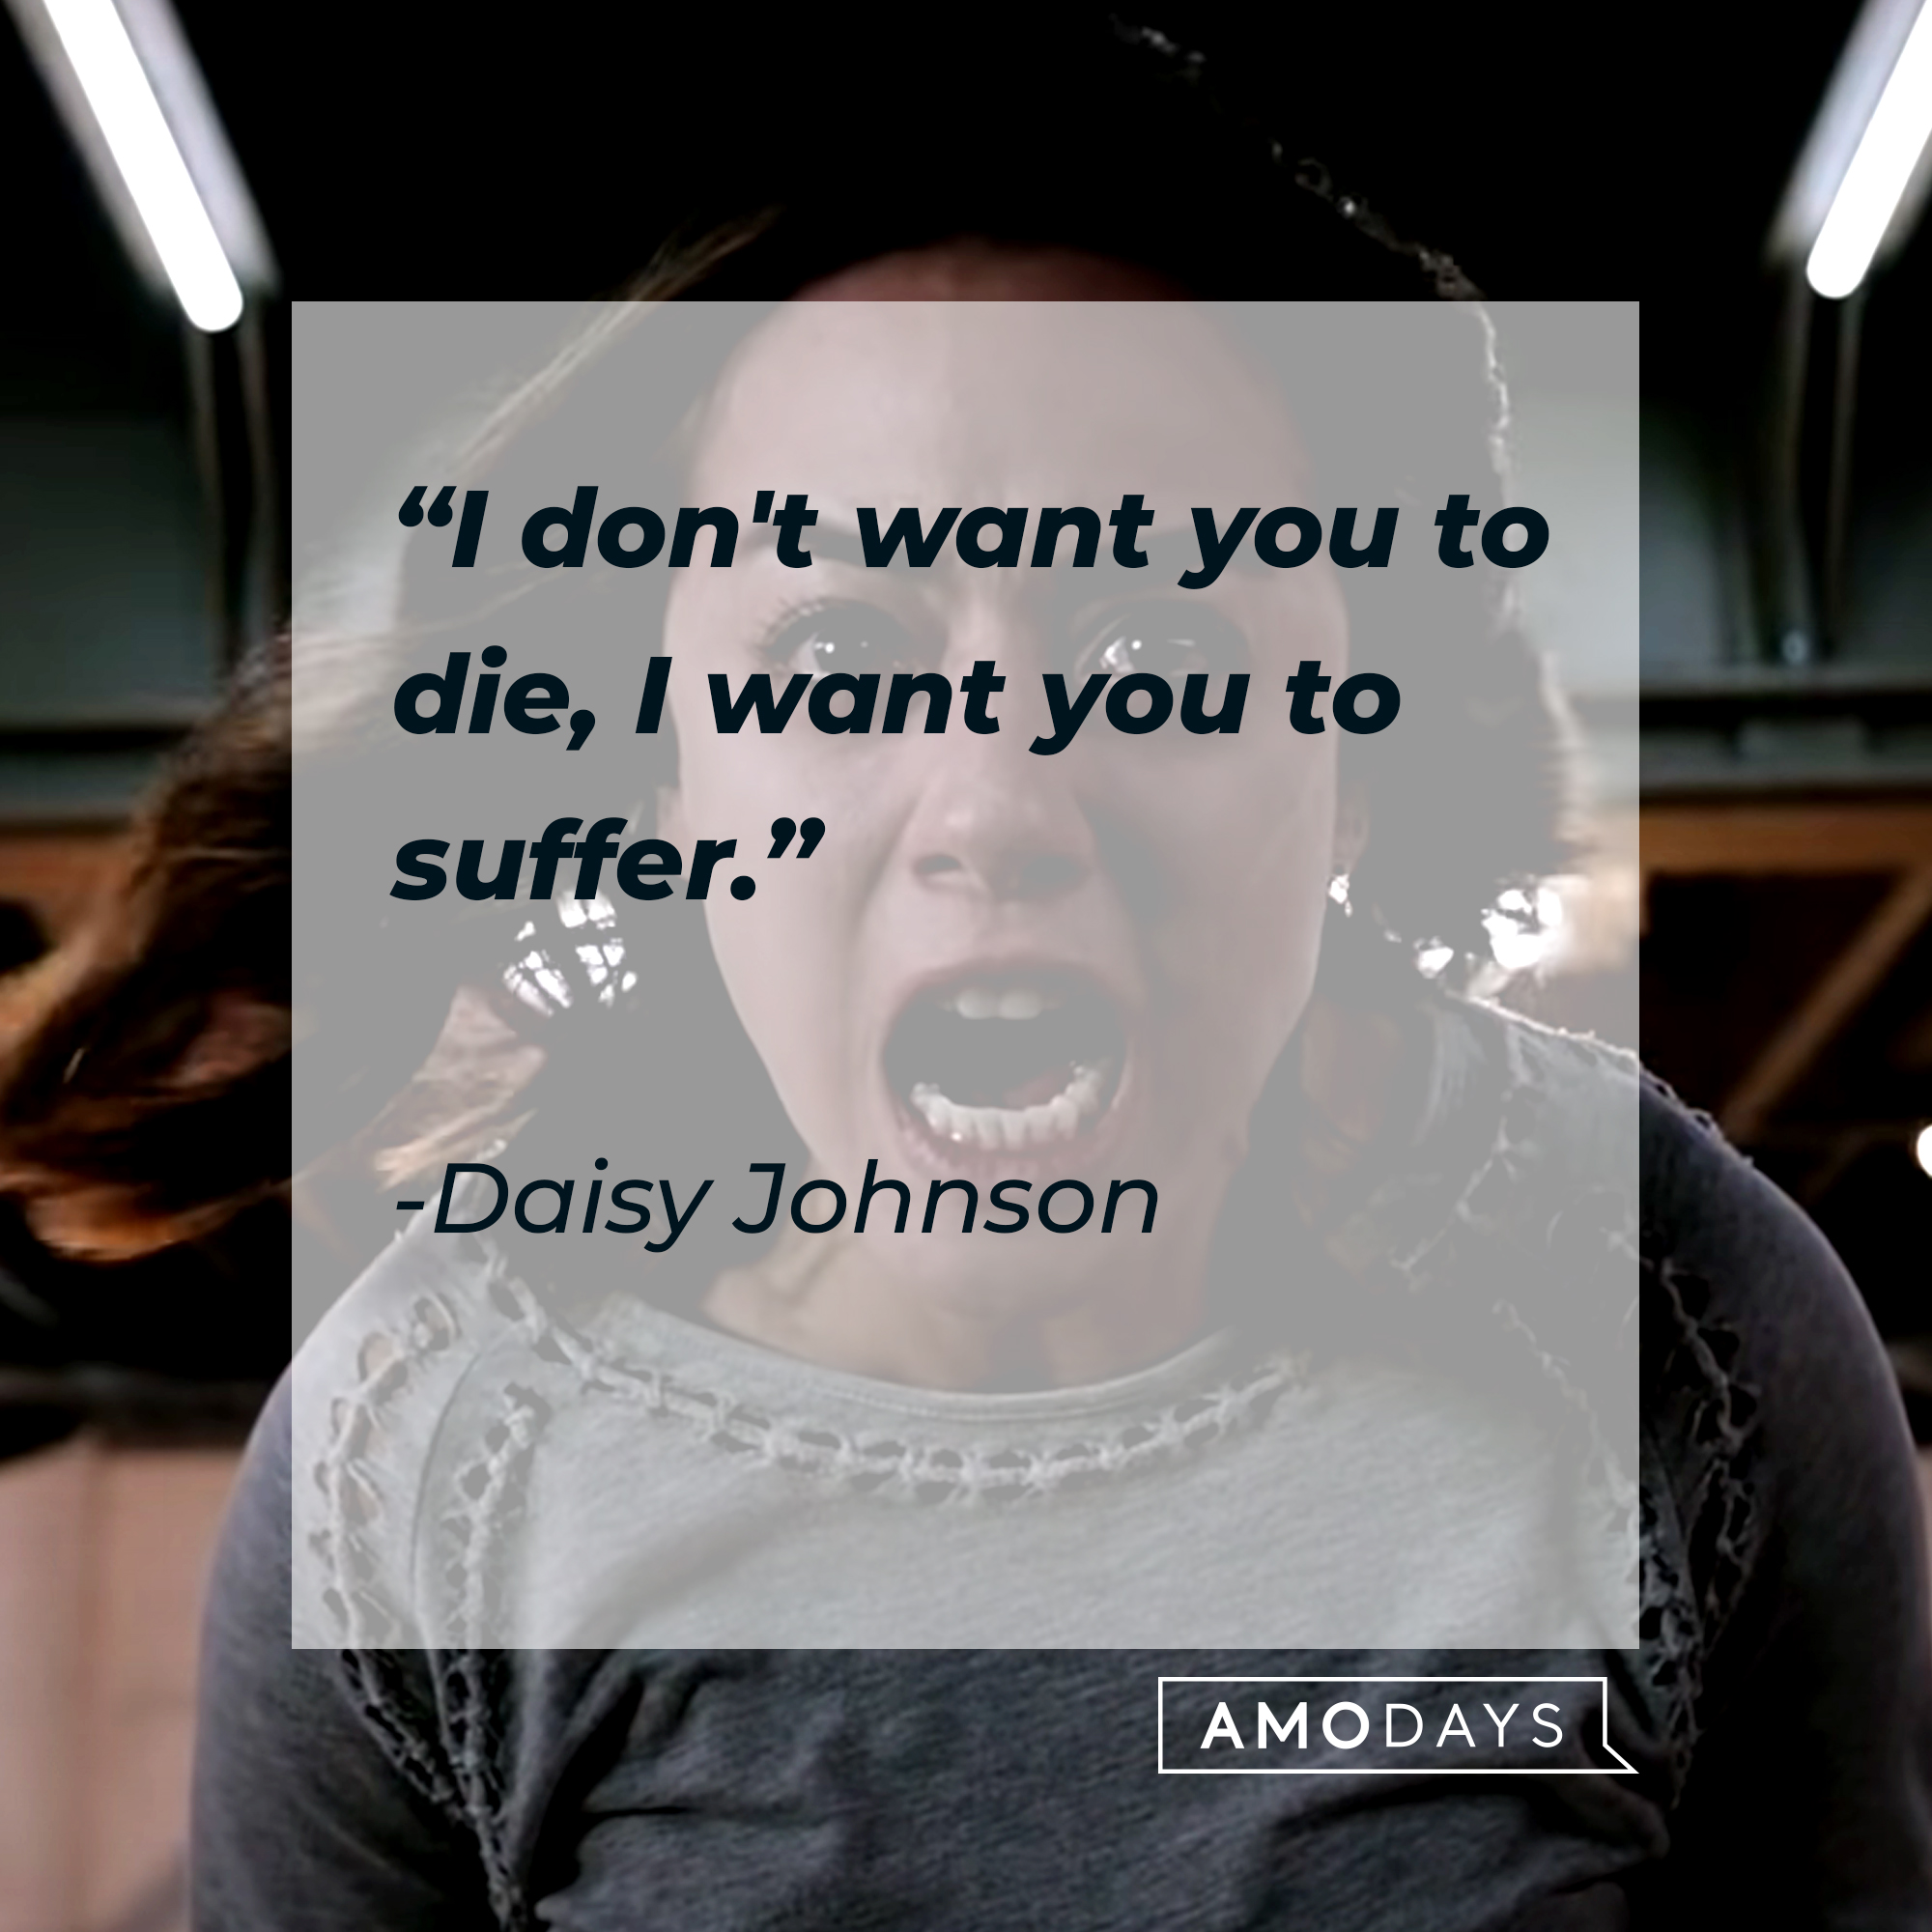 Daisy Johnson, with her quote: "I don't want you to die; I want you to suffer." | Source: Facebook.com/AgentsofShield